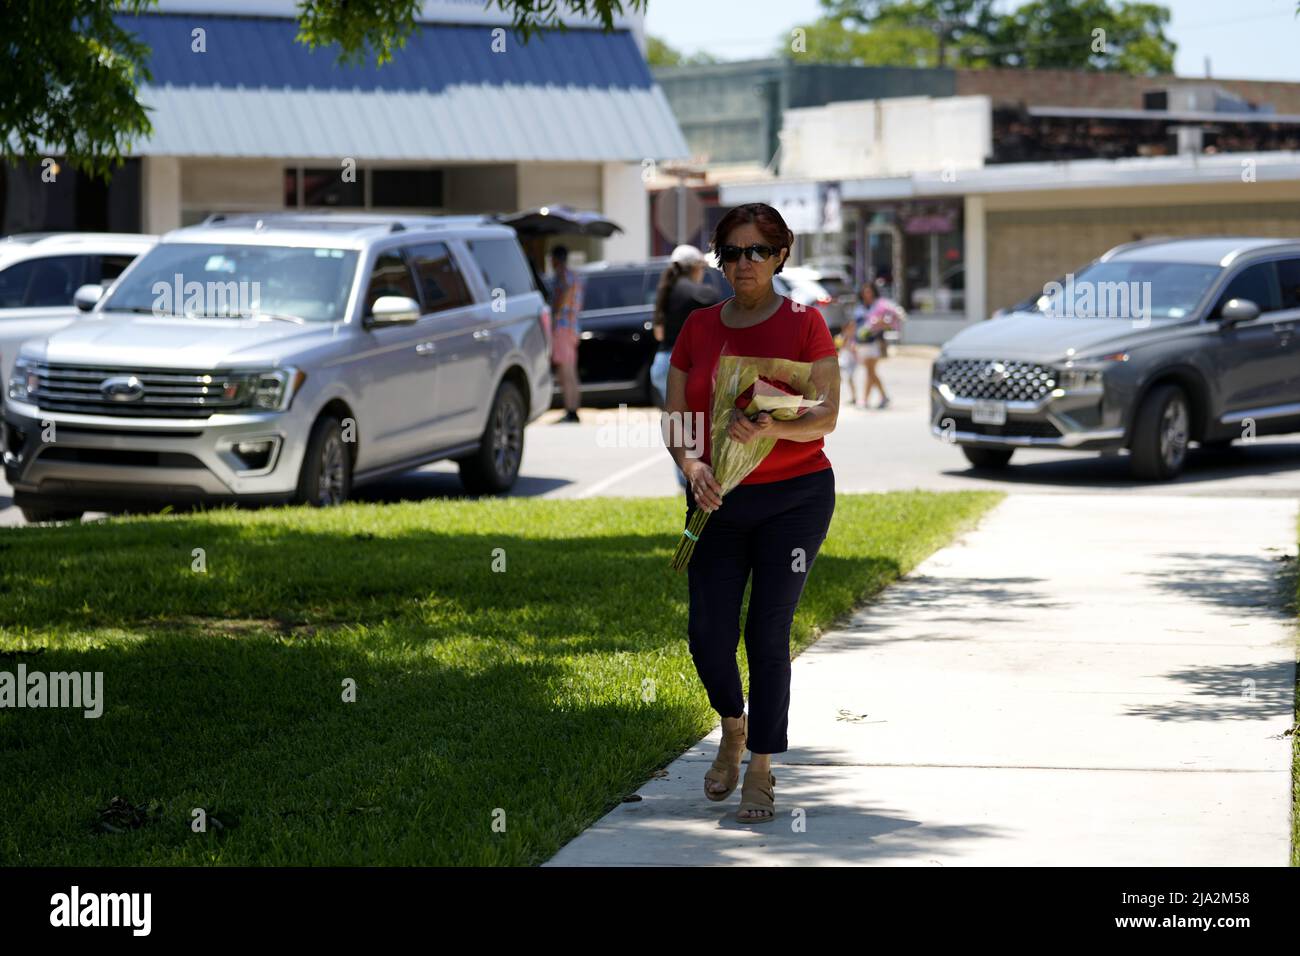 Uvalde, USA. 26th May, 2022. A woman comes to mourn for victims of a school mass shooting in Uvalde, Texas, the United States, May 26, 2022. At least 19 children and two adults were killed in a shooting at Robb Elementary School in the town of Uvalde, Texas, on Tuesday. Credit: Wu Xiaoling/Xinhua/Alamy Live News Stock Photo